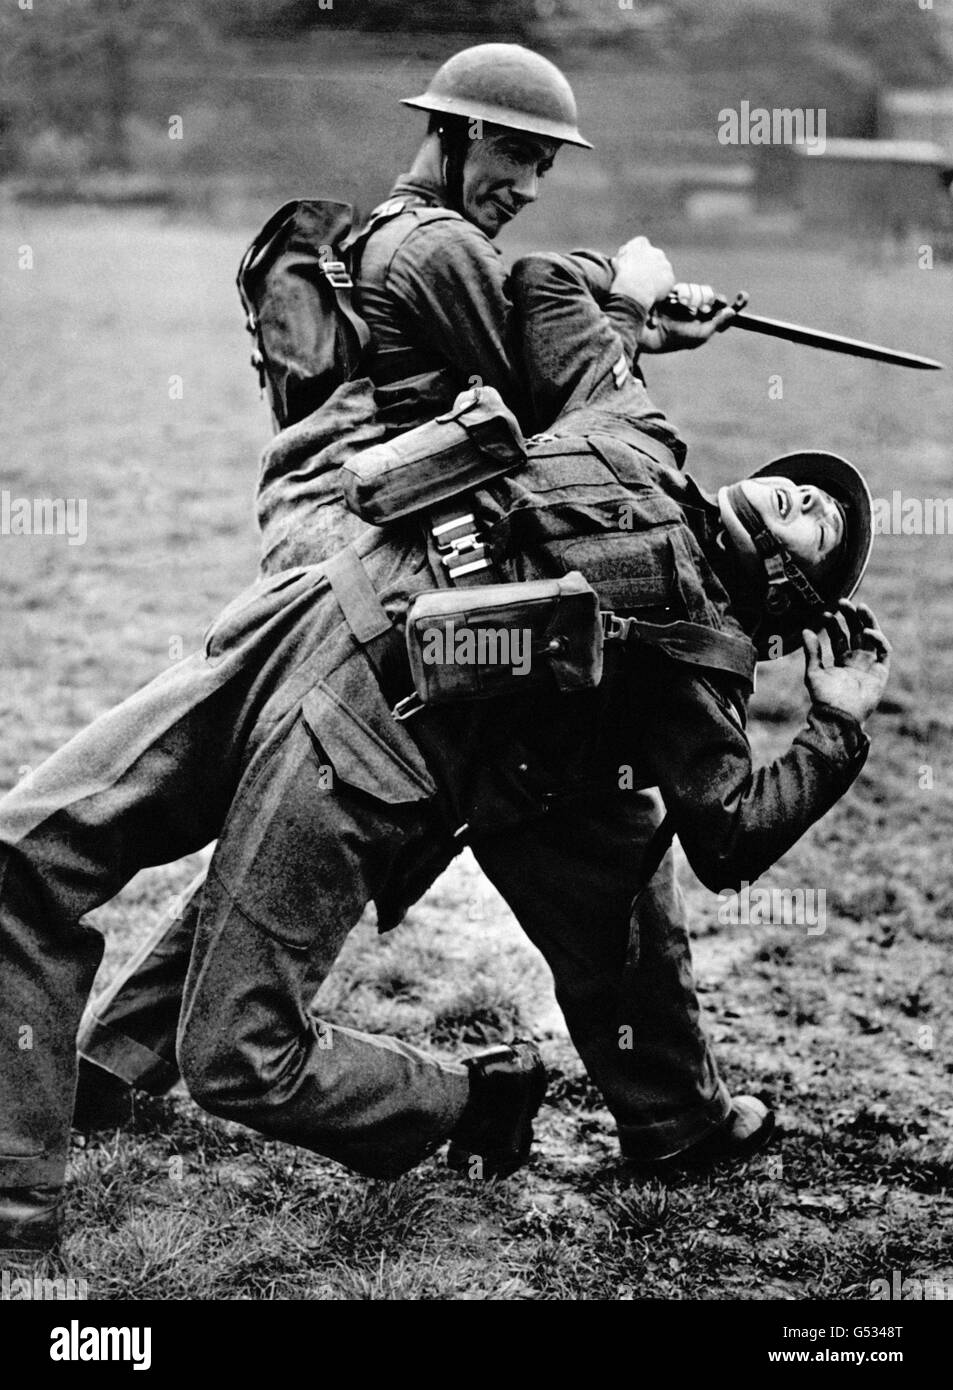 Two British soldiers enjoying a lesson in unarmed combat during the Second World War. One soldier attempts disarm the other, who is holding a bayonet. Stock Photo